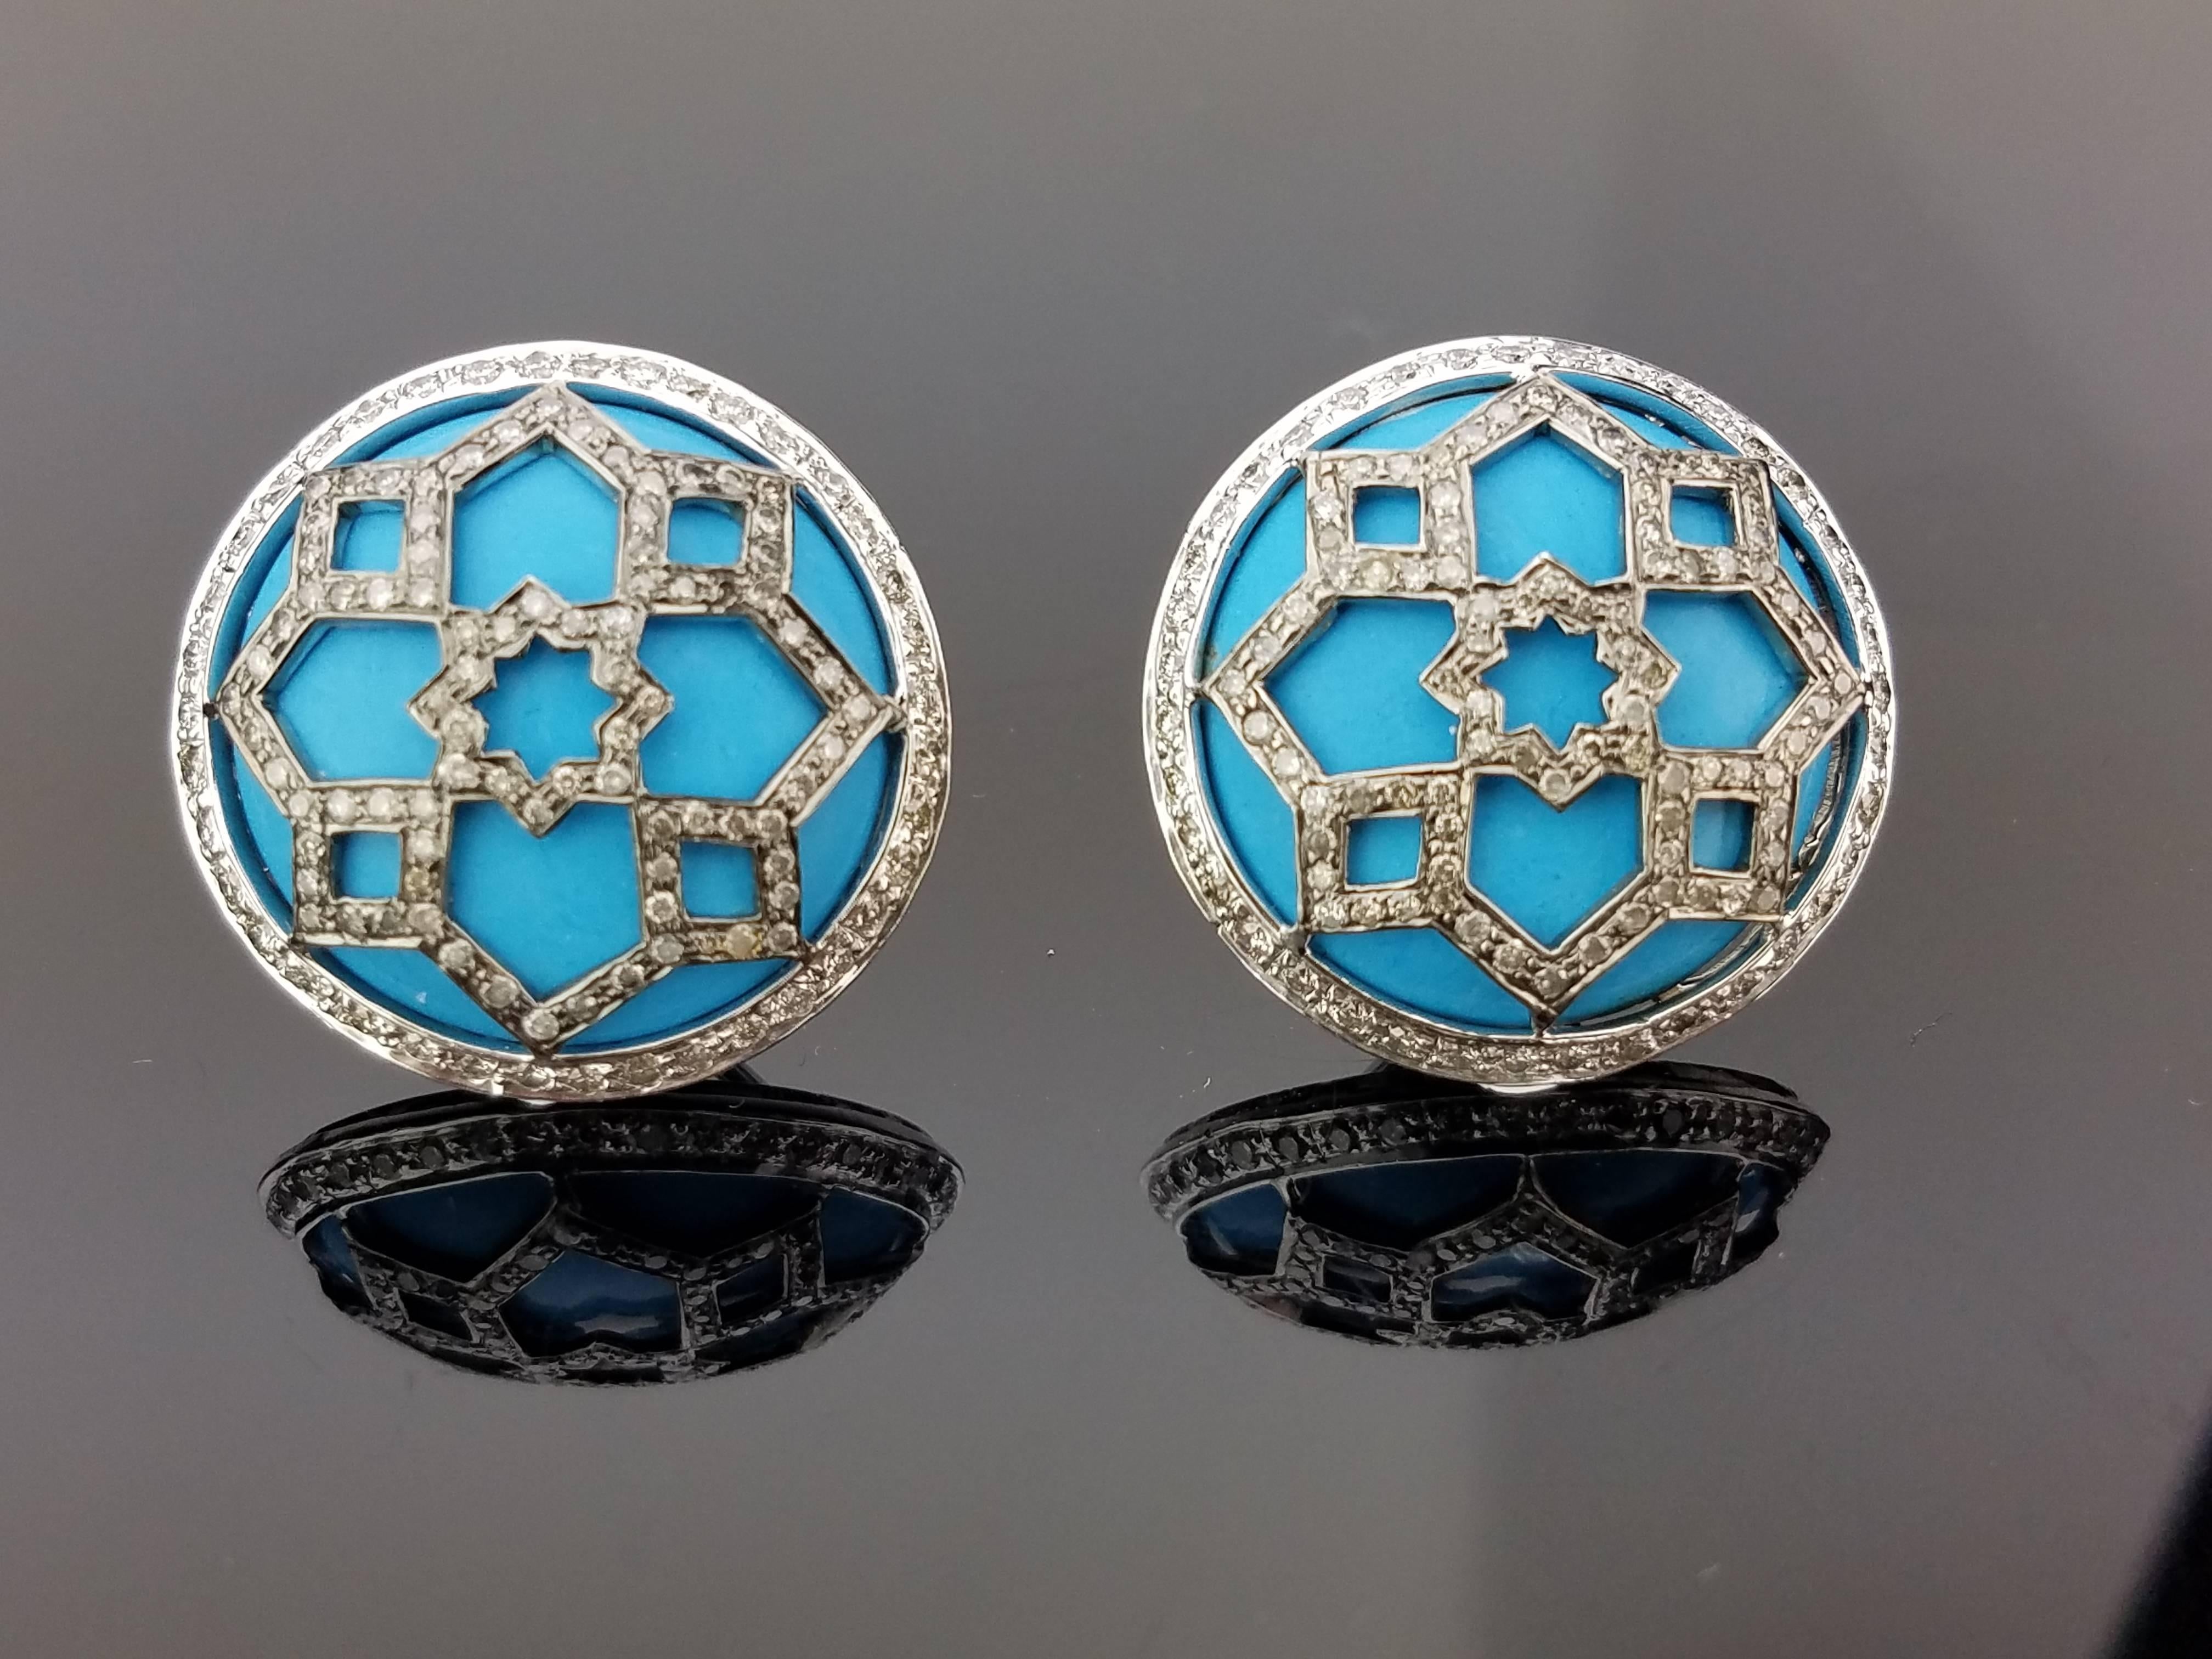 An art deco looking jewellery suite, comprising of ring and studs earring using Turquoise Cabochon and Diamonds, all set in 18K Gold. 

Earring Details:  43.5 carat Turquoise / 2.15 carat Diamond
Ring Details: 22.75 carat Turquoise / 1.09 carat